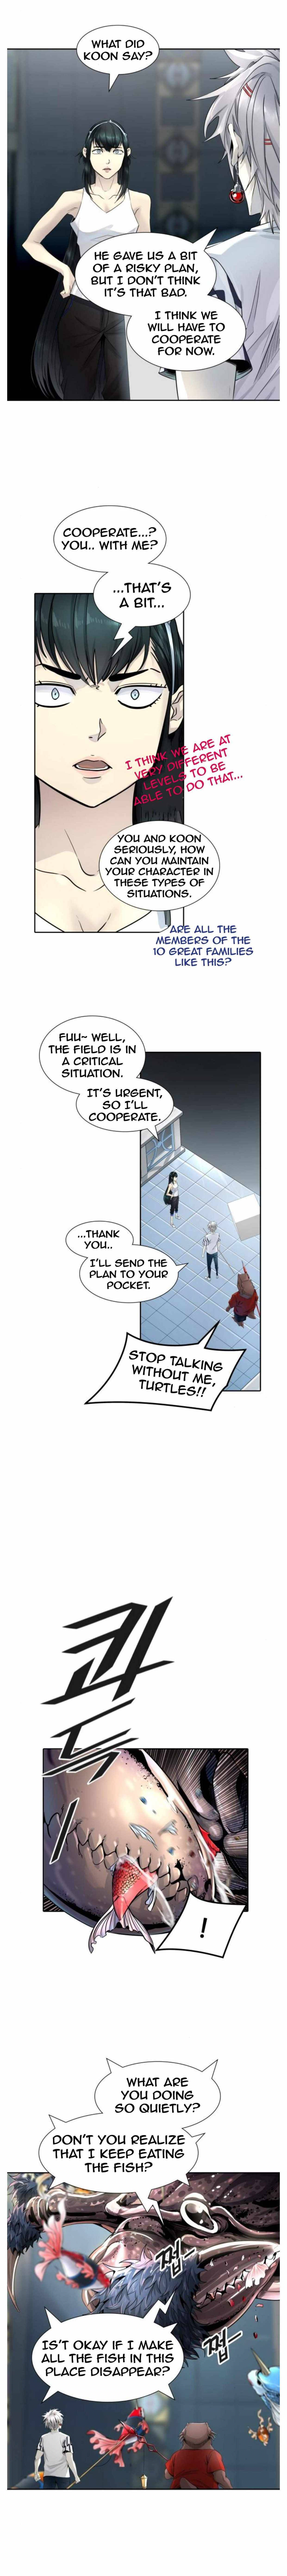 tower of god 501, tower of god 501, Read tower of god 501, tower of god 501 Manga, tower of god 501 english, tower of god 501 raw manga, tower of god 501 online, tower of god 501 high quality, tower of god 501 chapter, tower of god 501 manga scan